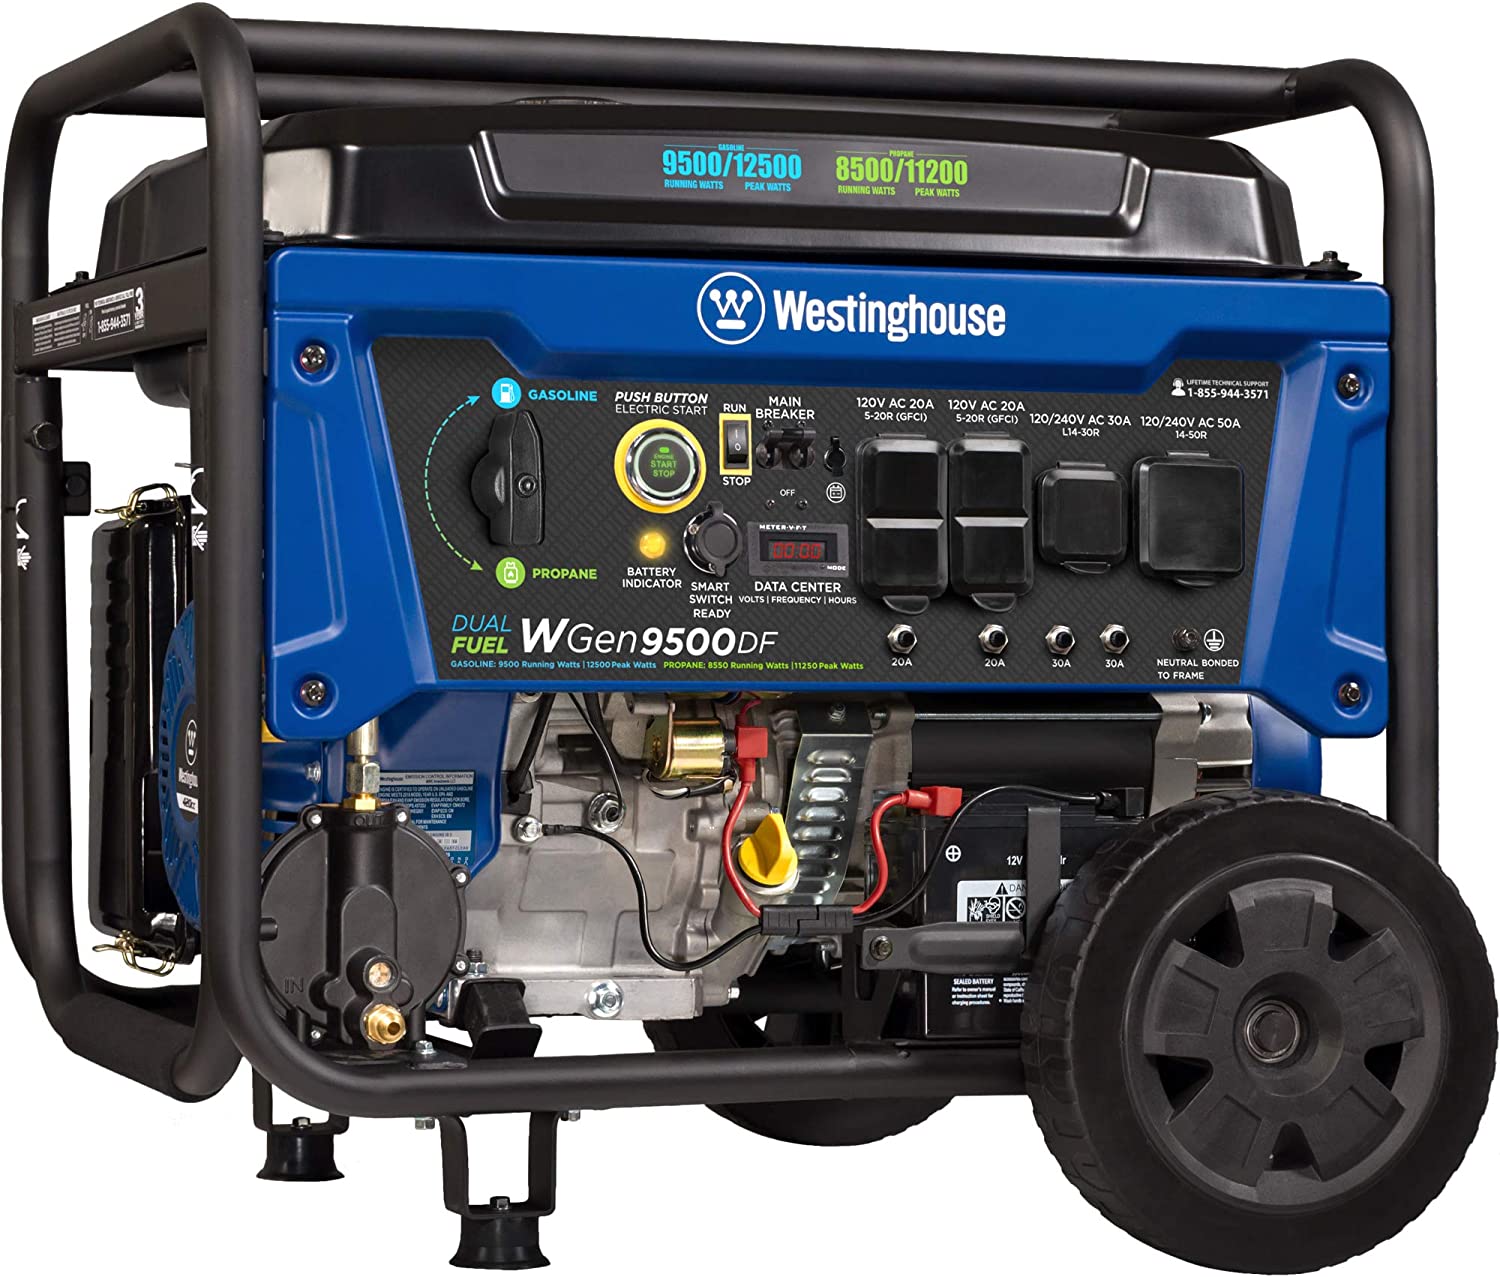 Westinghouse 12500 Watt Dual Fuel Home Backup Portable Generator, Remote Electric Start, Transfer Switch Ready, Gas and Propane Powered, CARB Compliant